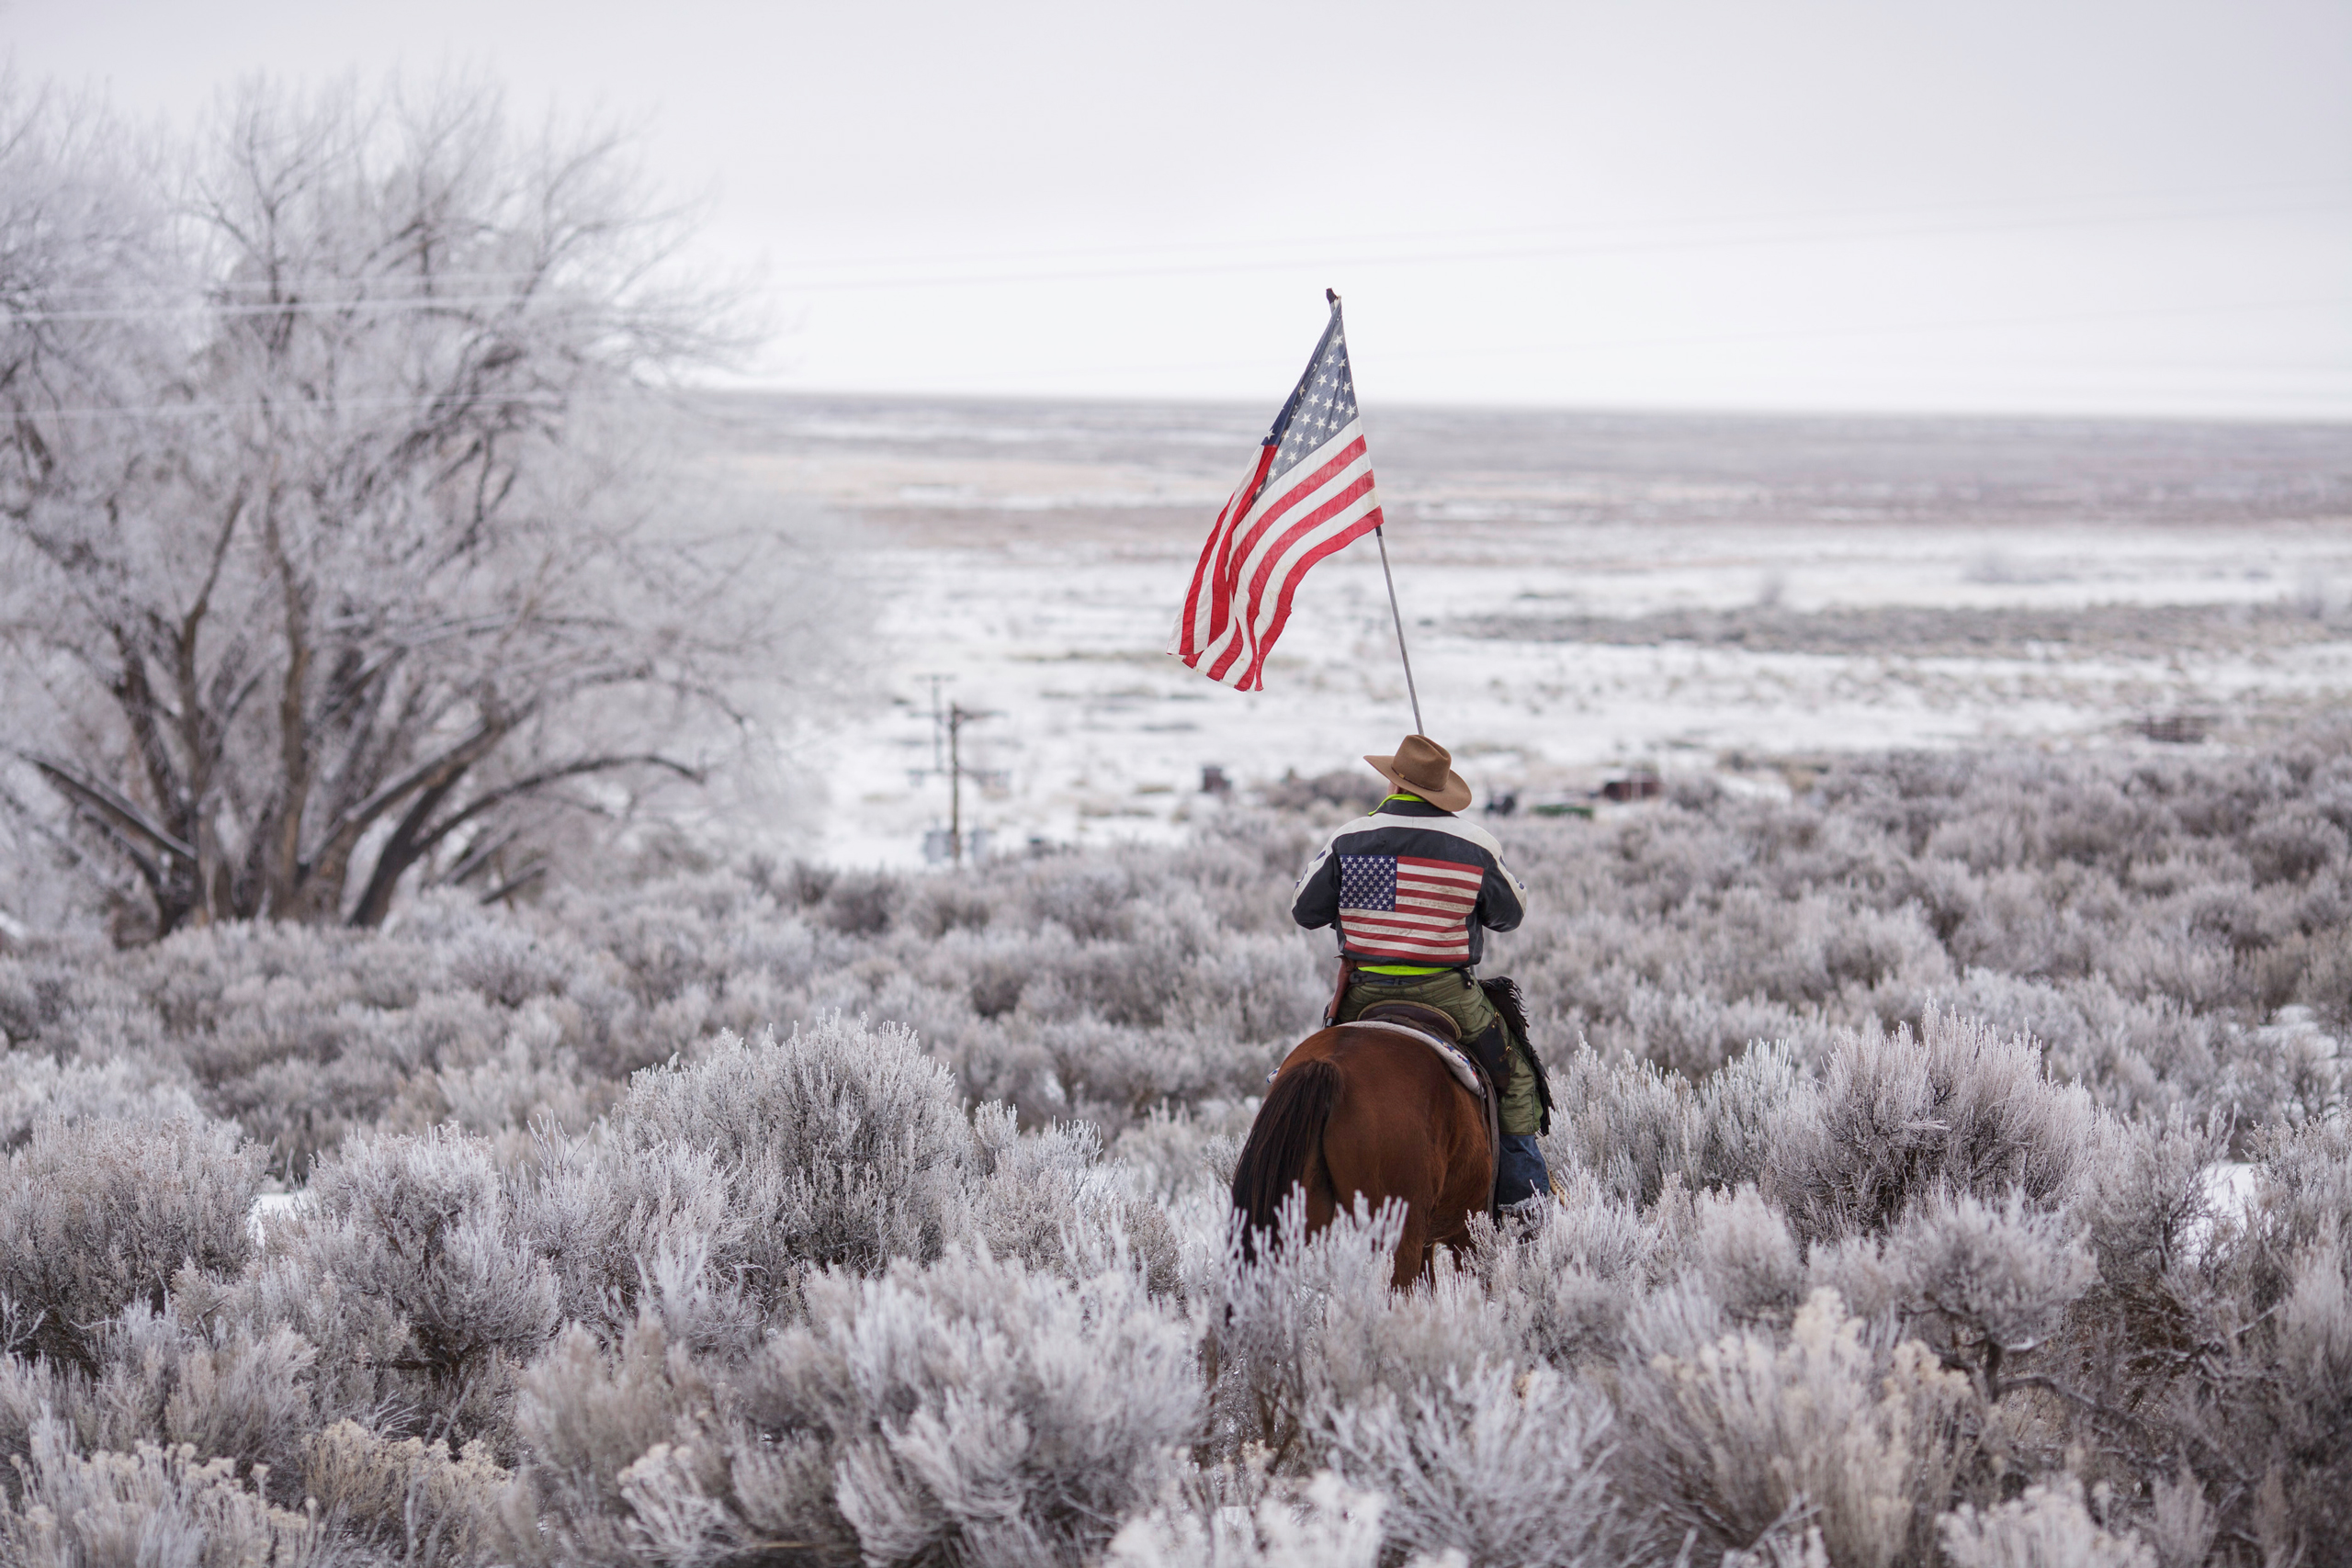 Duane Ehmer rides his horse Hellboy at the occupied Malheur National Wildlife Refuge on the sixth day of the occupation of the federal building in Burns, Oregon, on Jan. 7, 2016. (Rob Kerr—AFP/Getty Images)